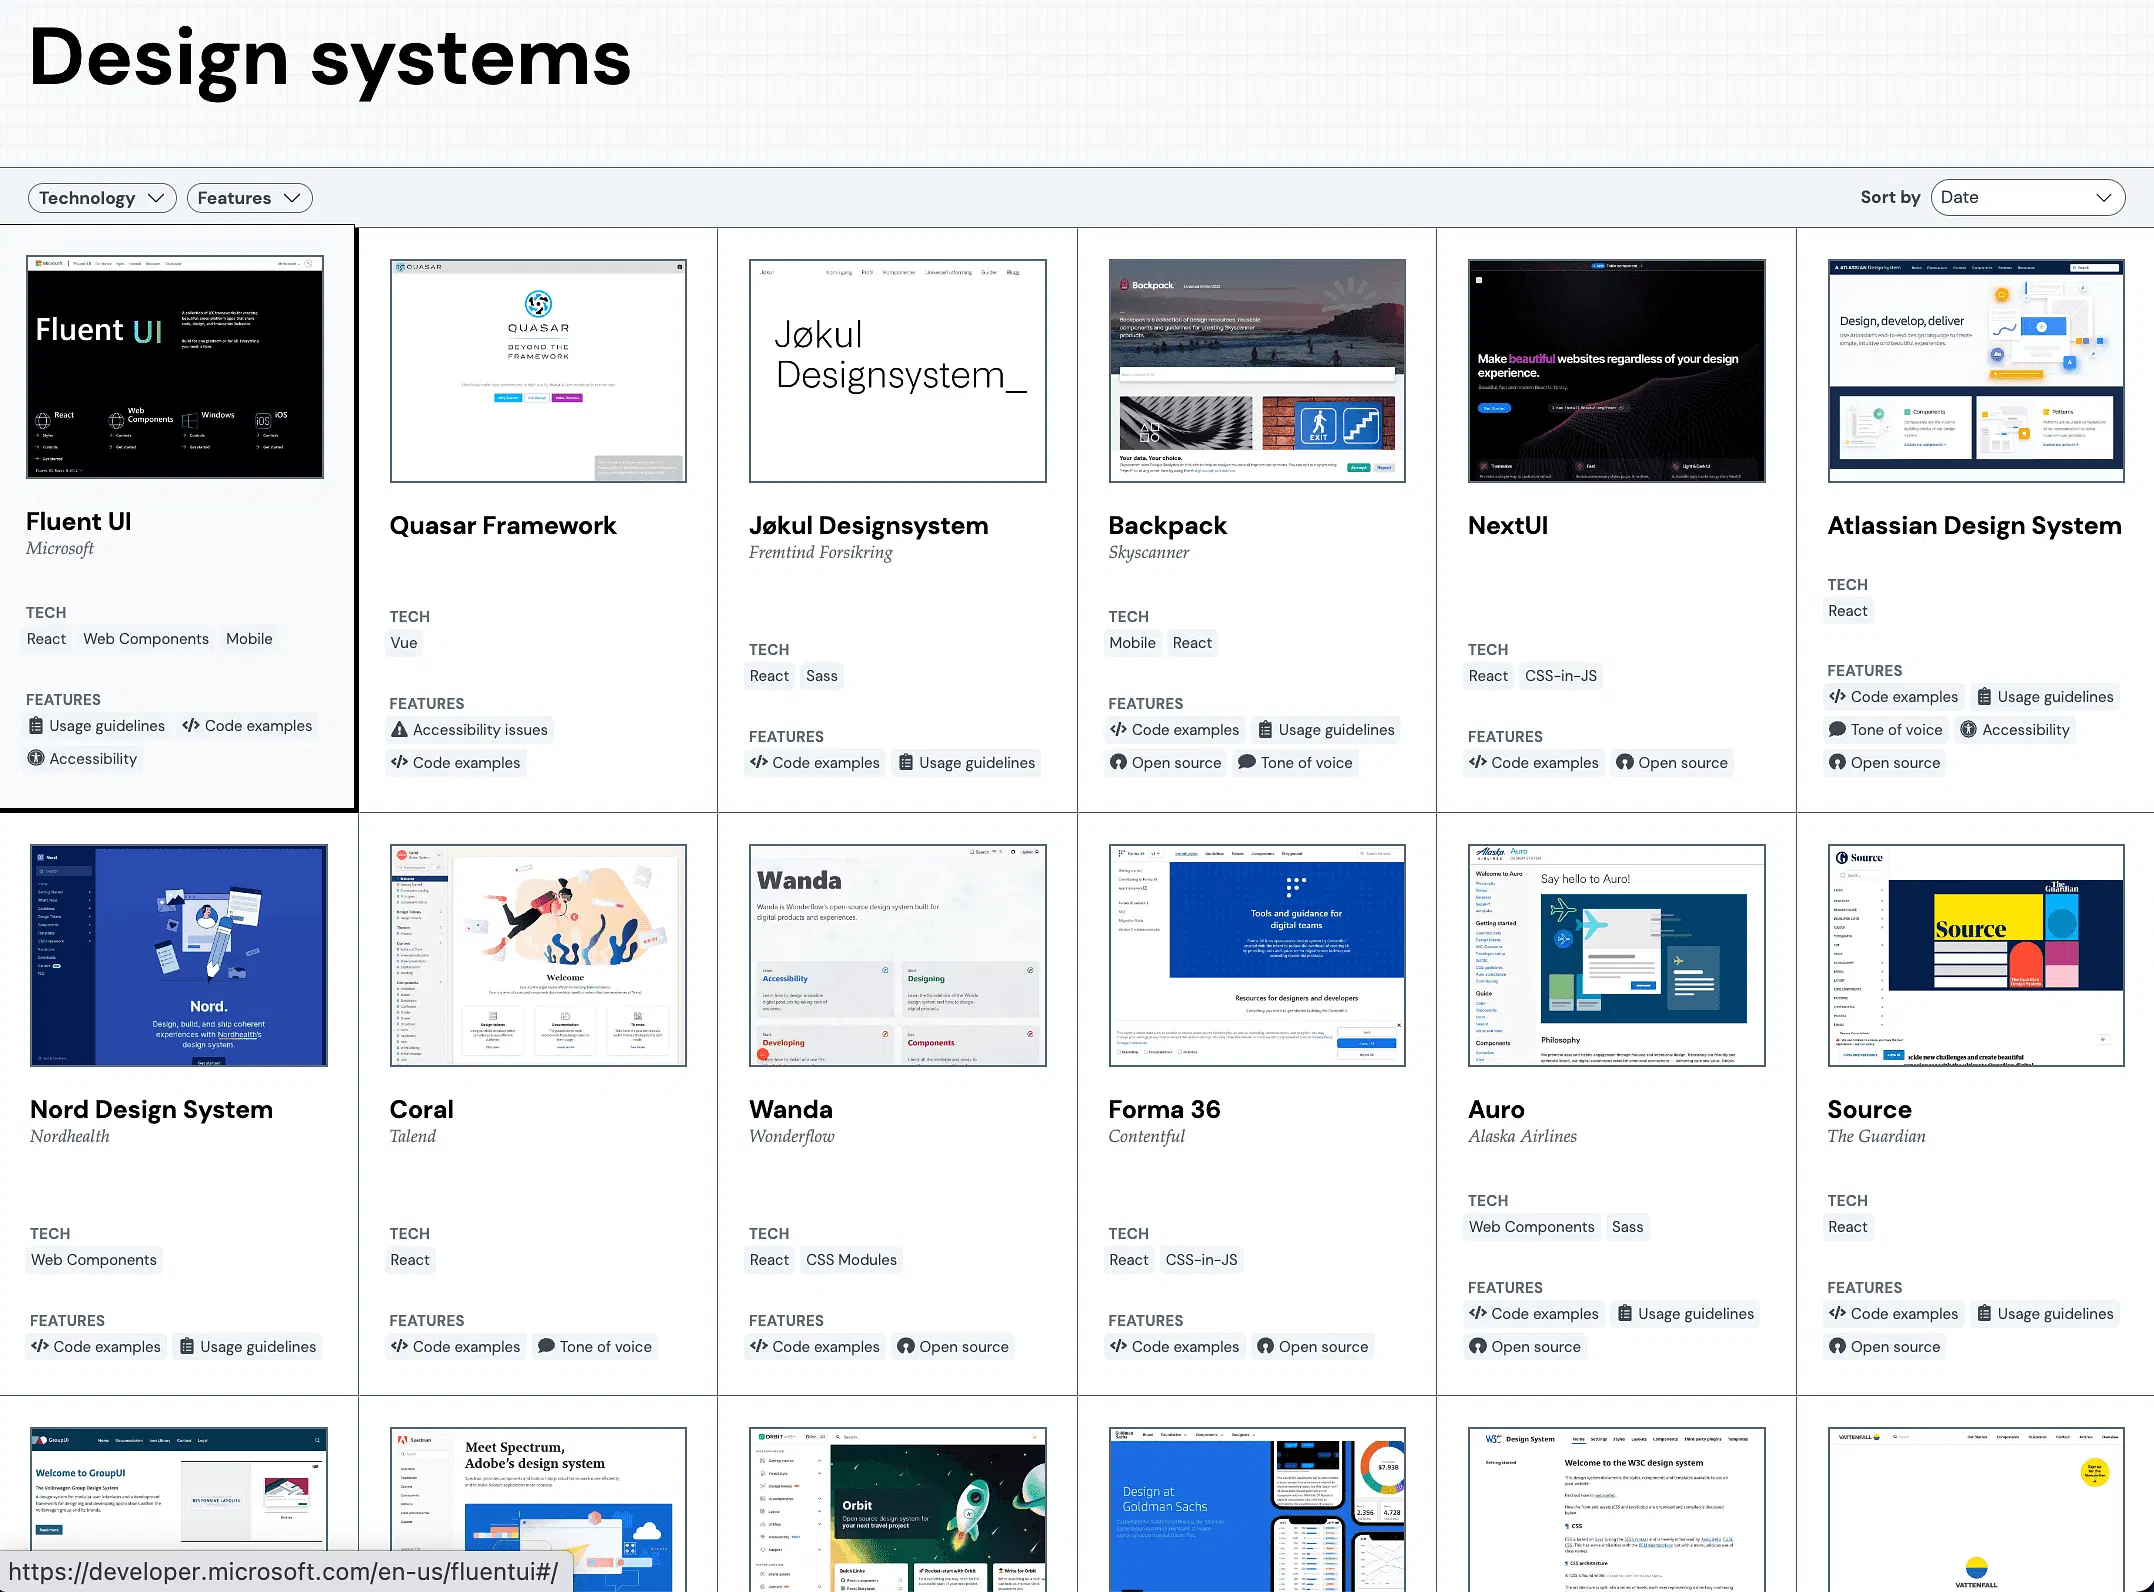 Good Fellas 12 Days of Techmas- Day 5: The Component Gallery Design Systems